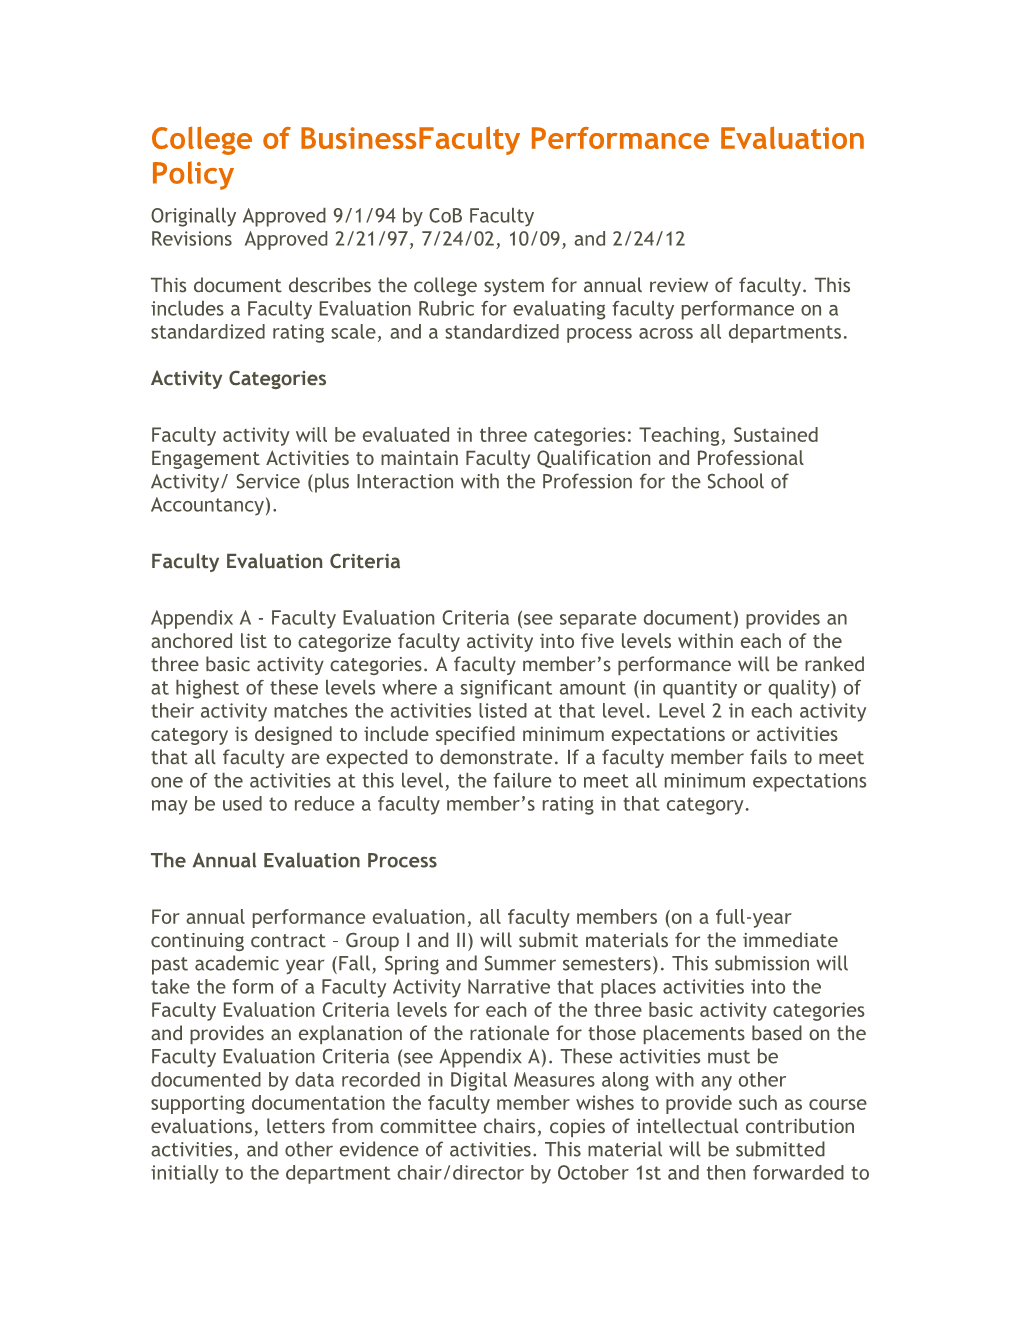 College of Business Faculty Performance Evaluation Policy